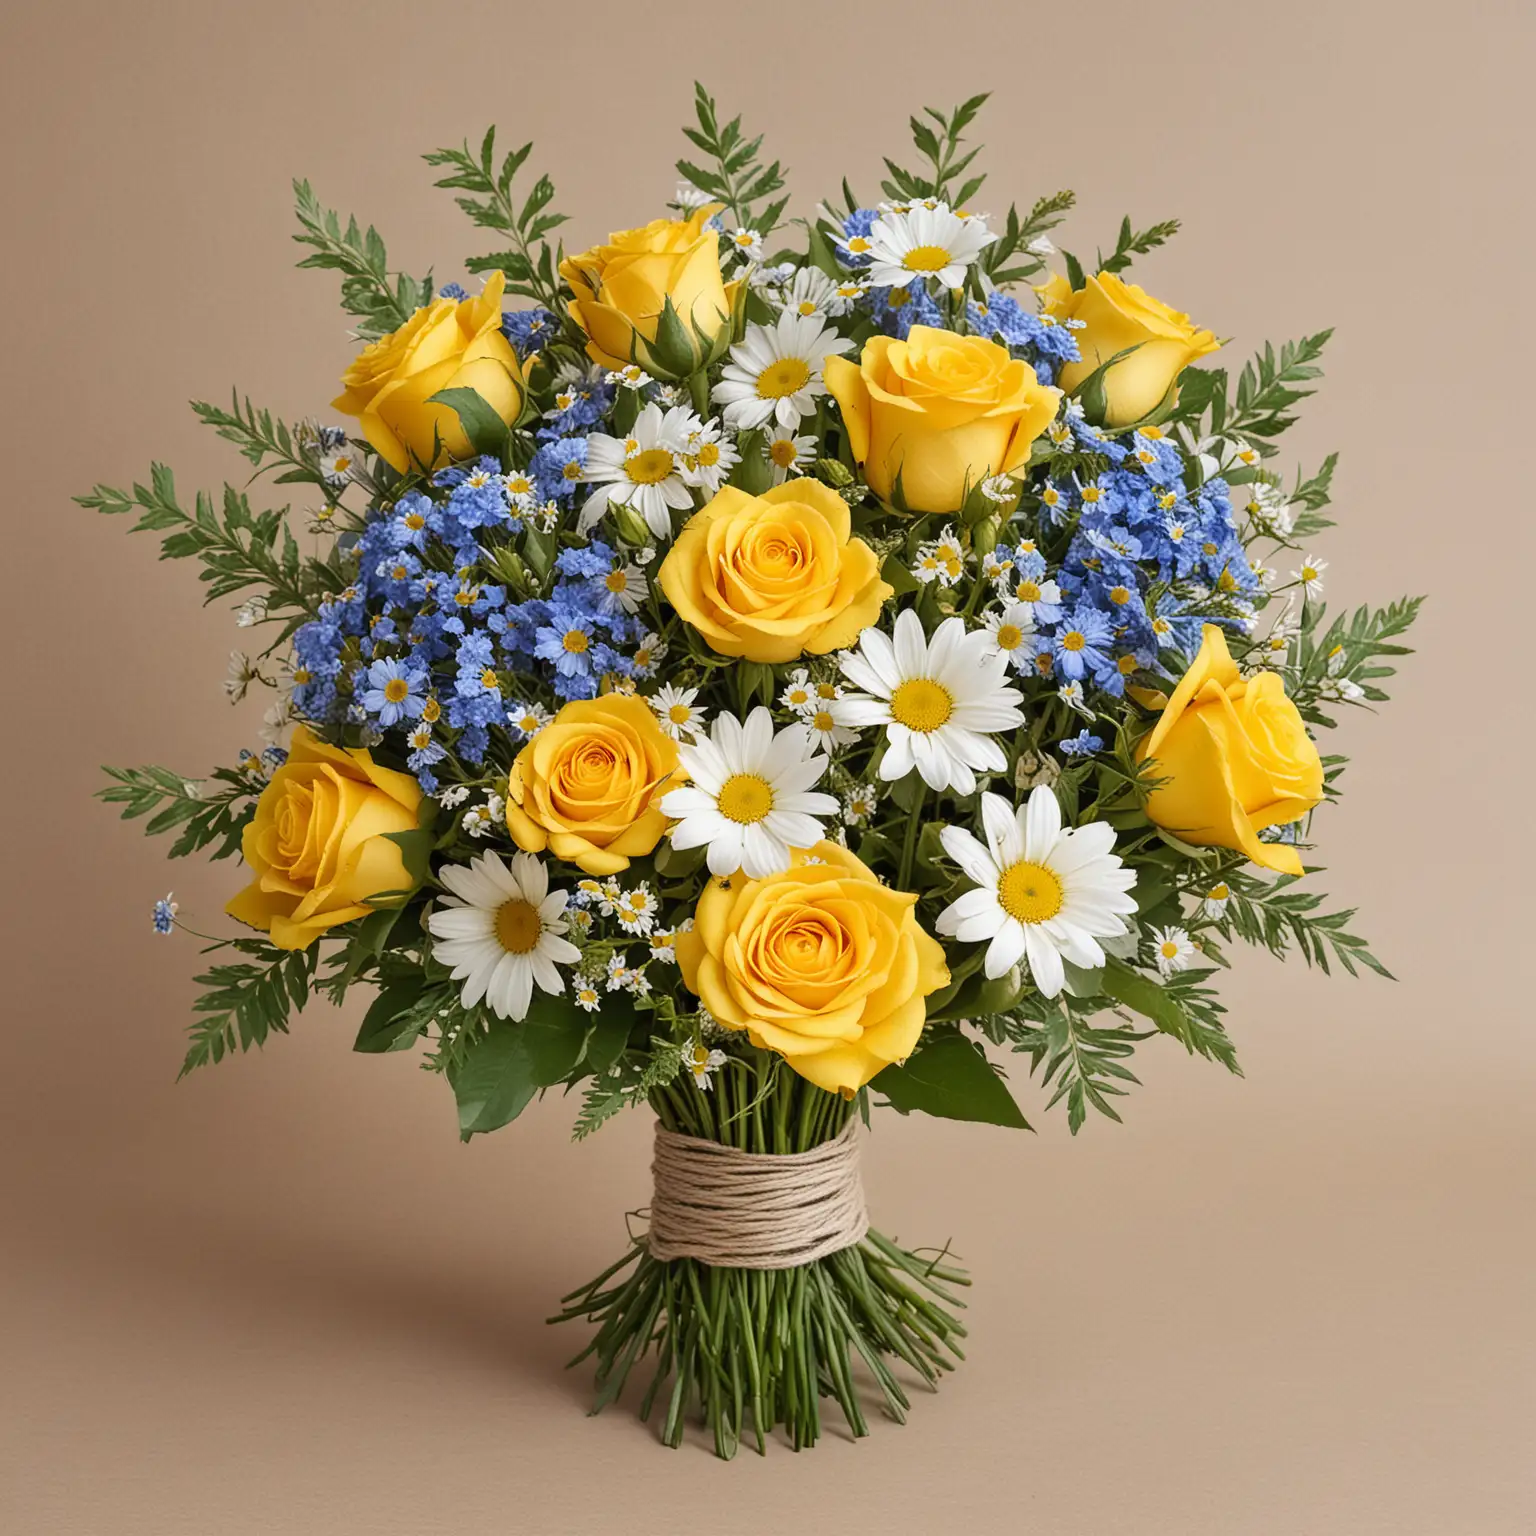 Greeting card with Bouquet of yellow roses with white daisies and a few small blue flowers - made as a wild flower arrangement. To be tied with natural cord at the bottom